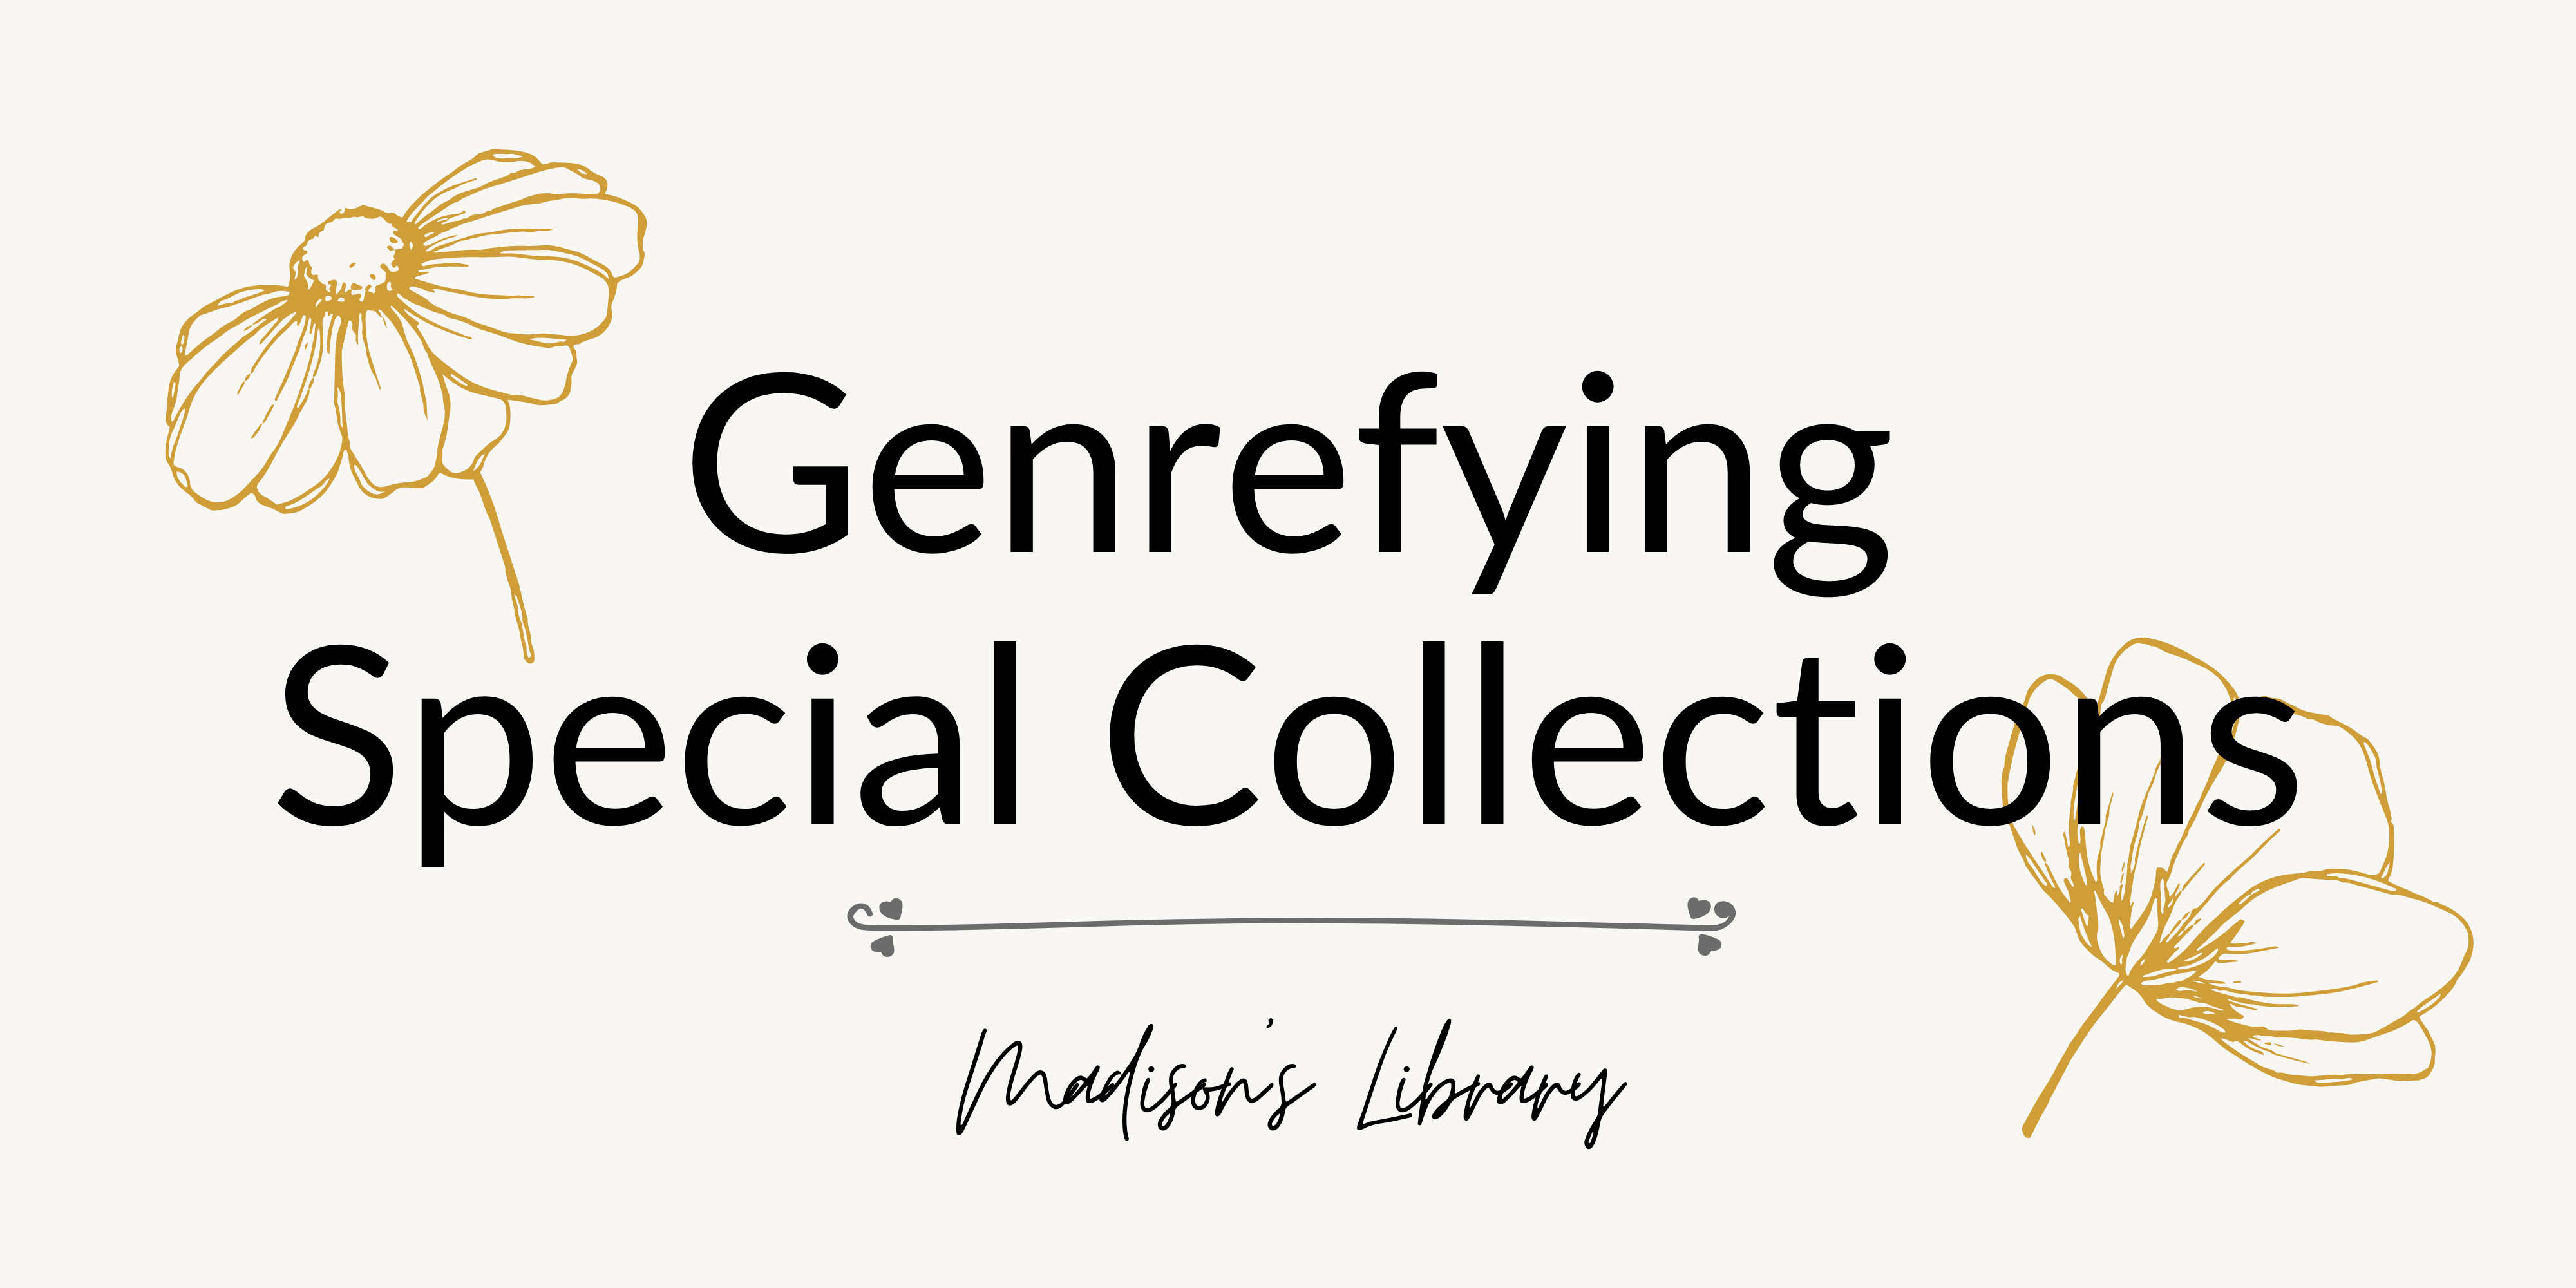 Genrefying Special Collections